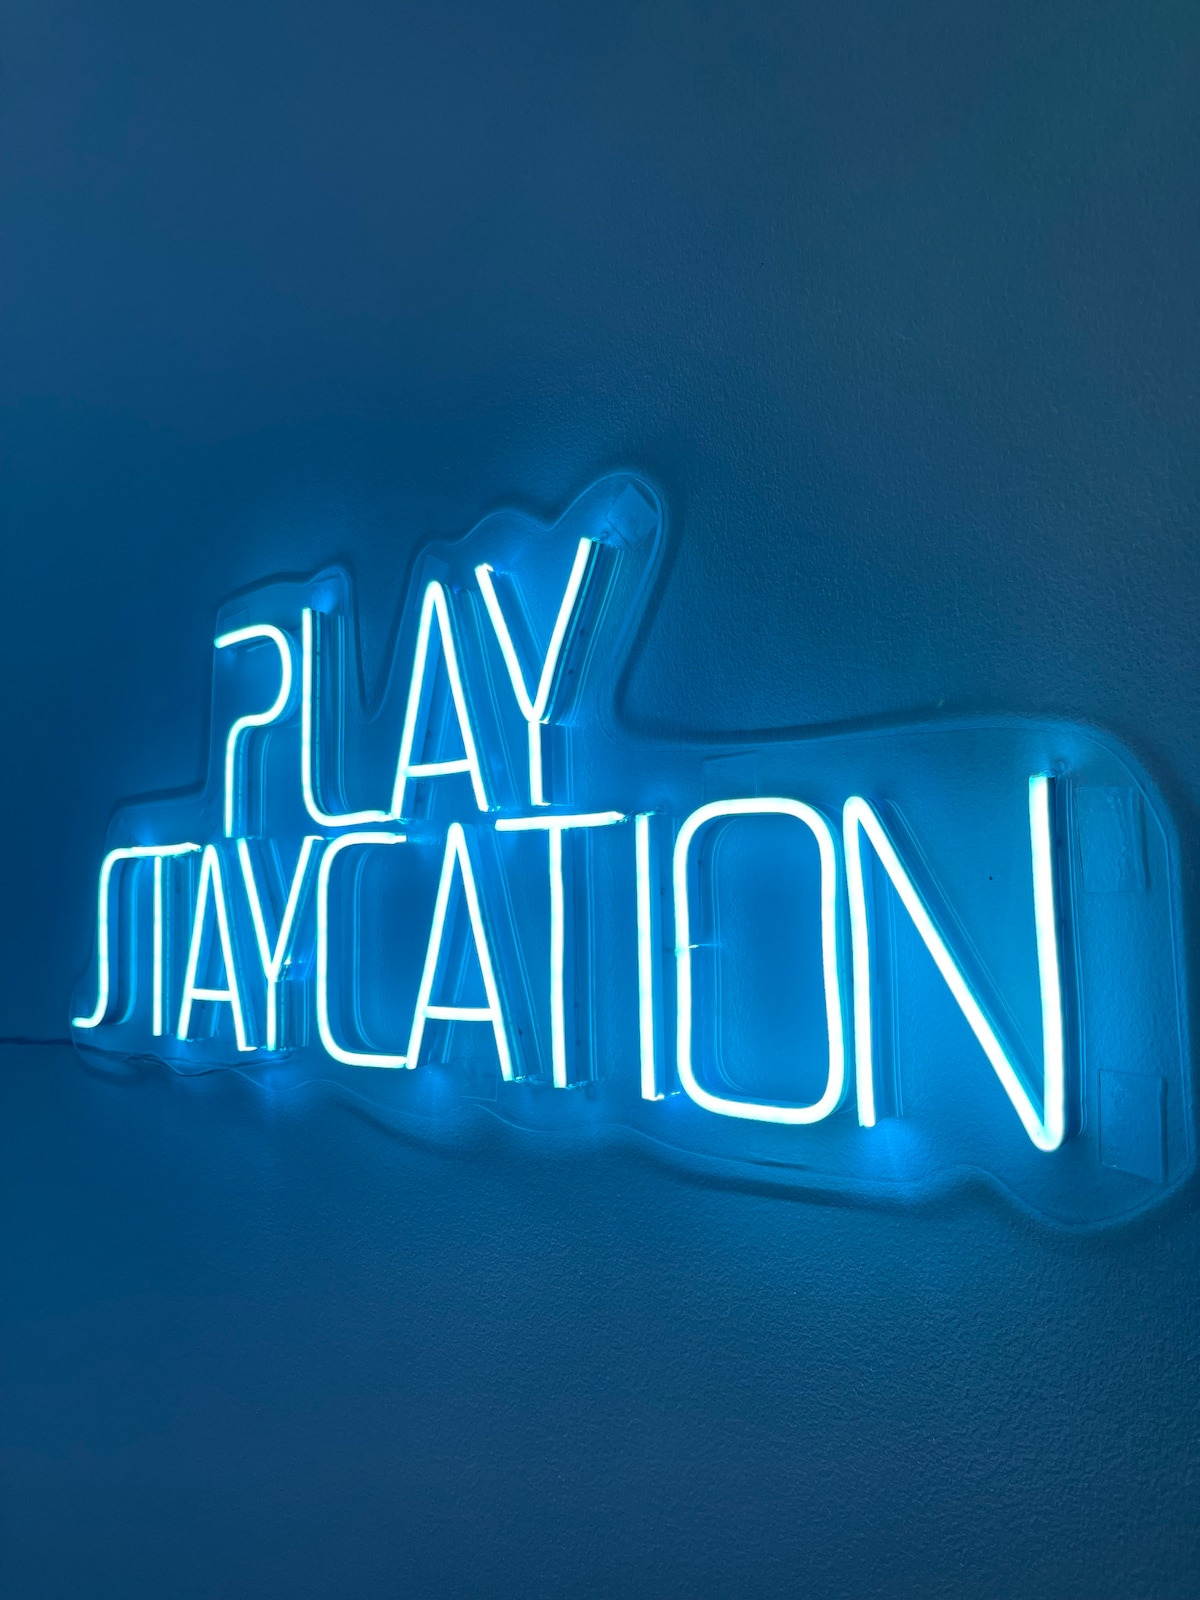 Play Staycation at Mplace